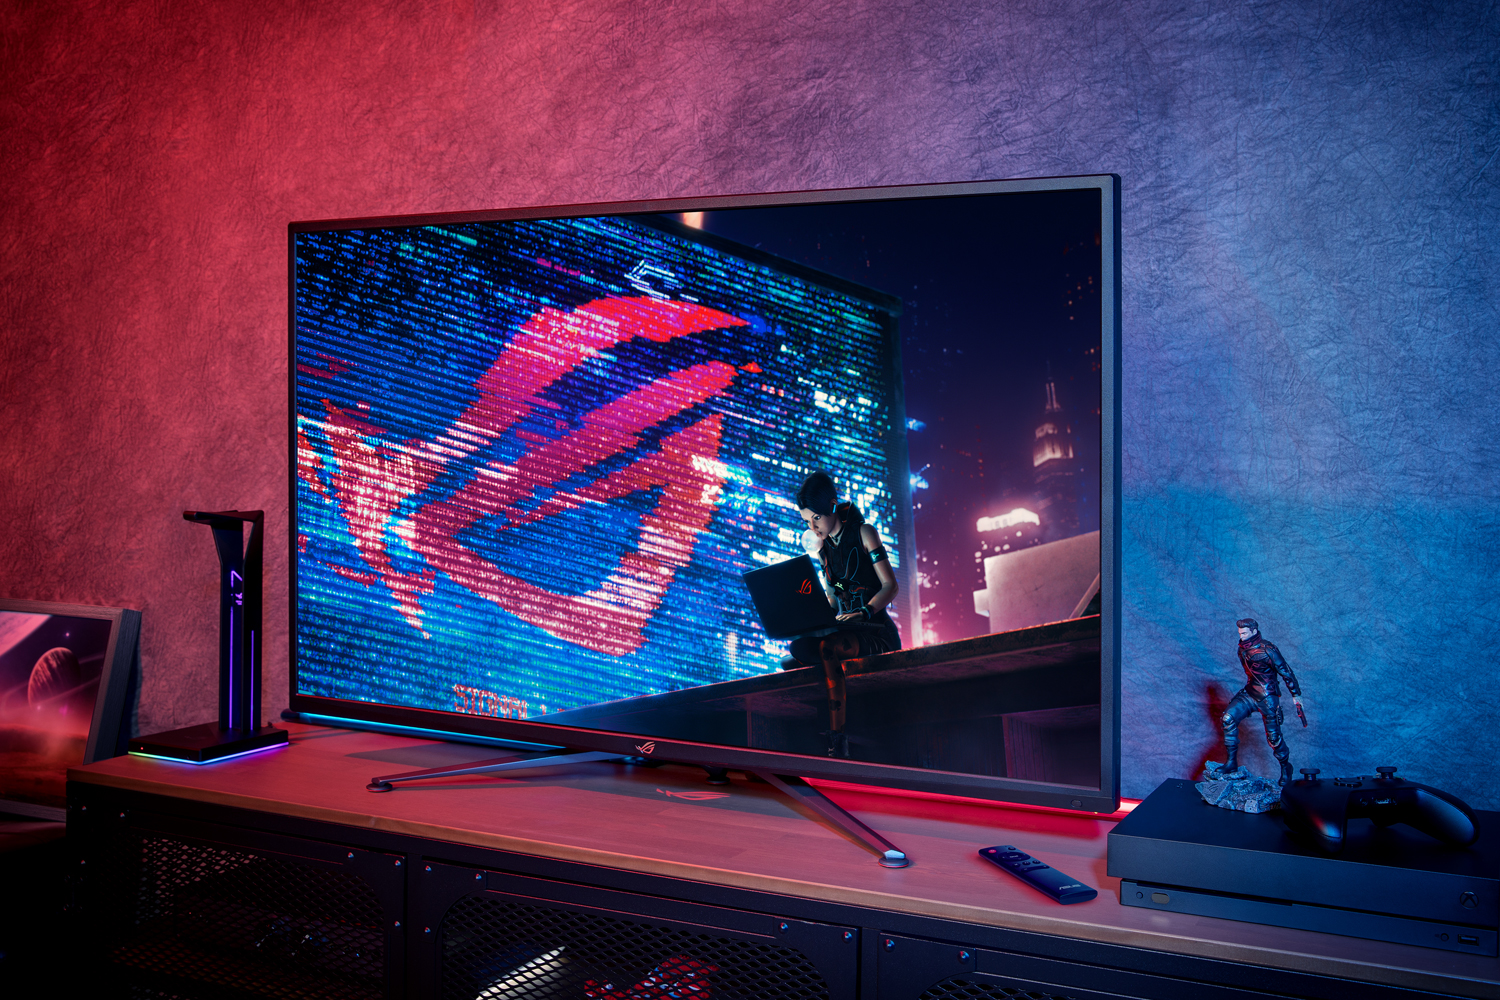 Asus shows off new 43″ 4K/144Hz monitor with Display Stream Compression